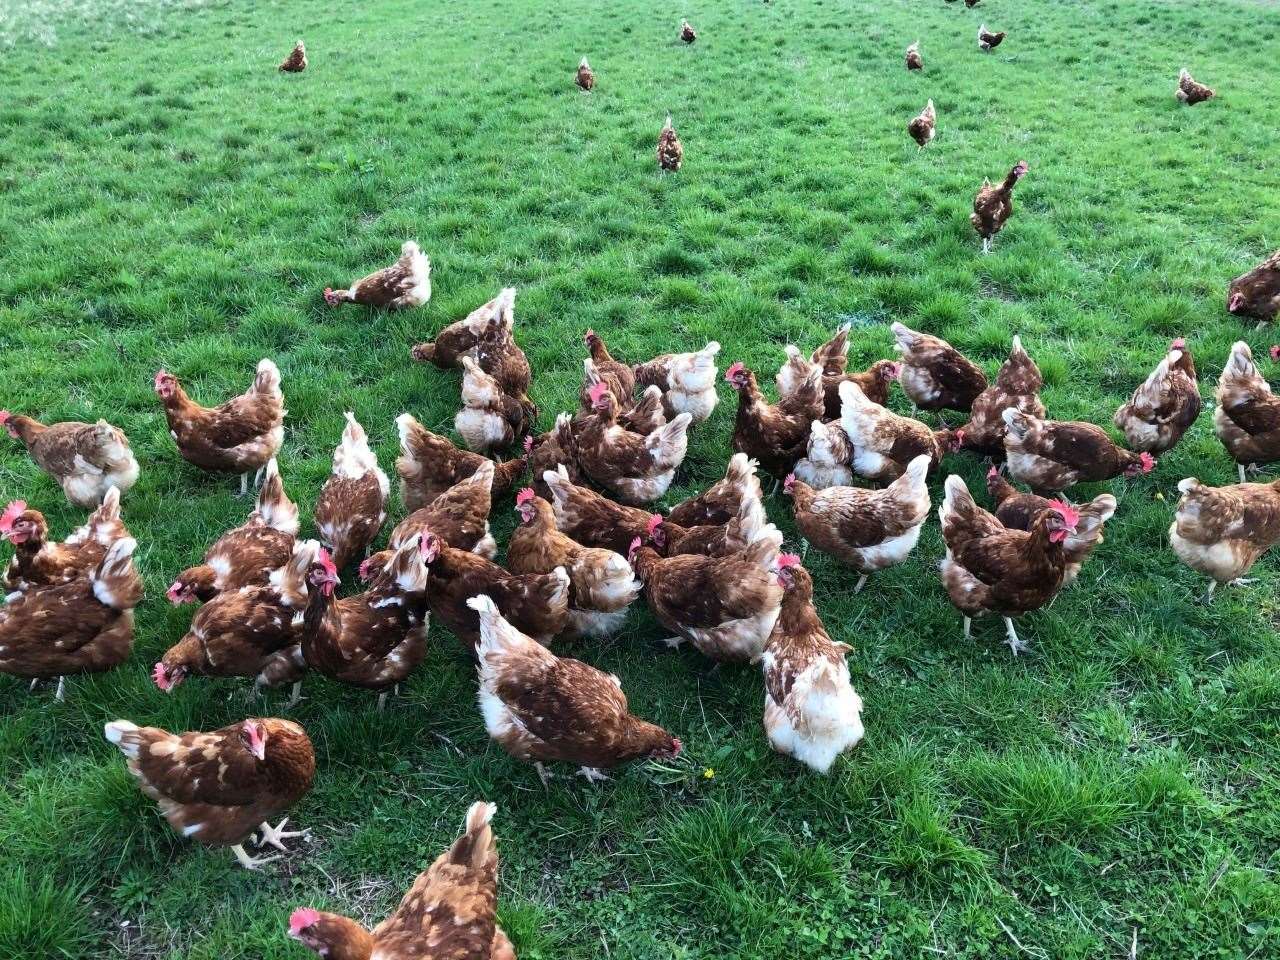 Chickens have been unable to be kept outside because of the outbreak